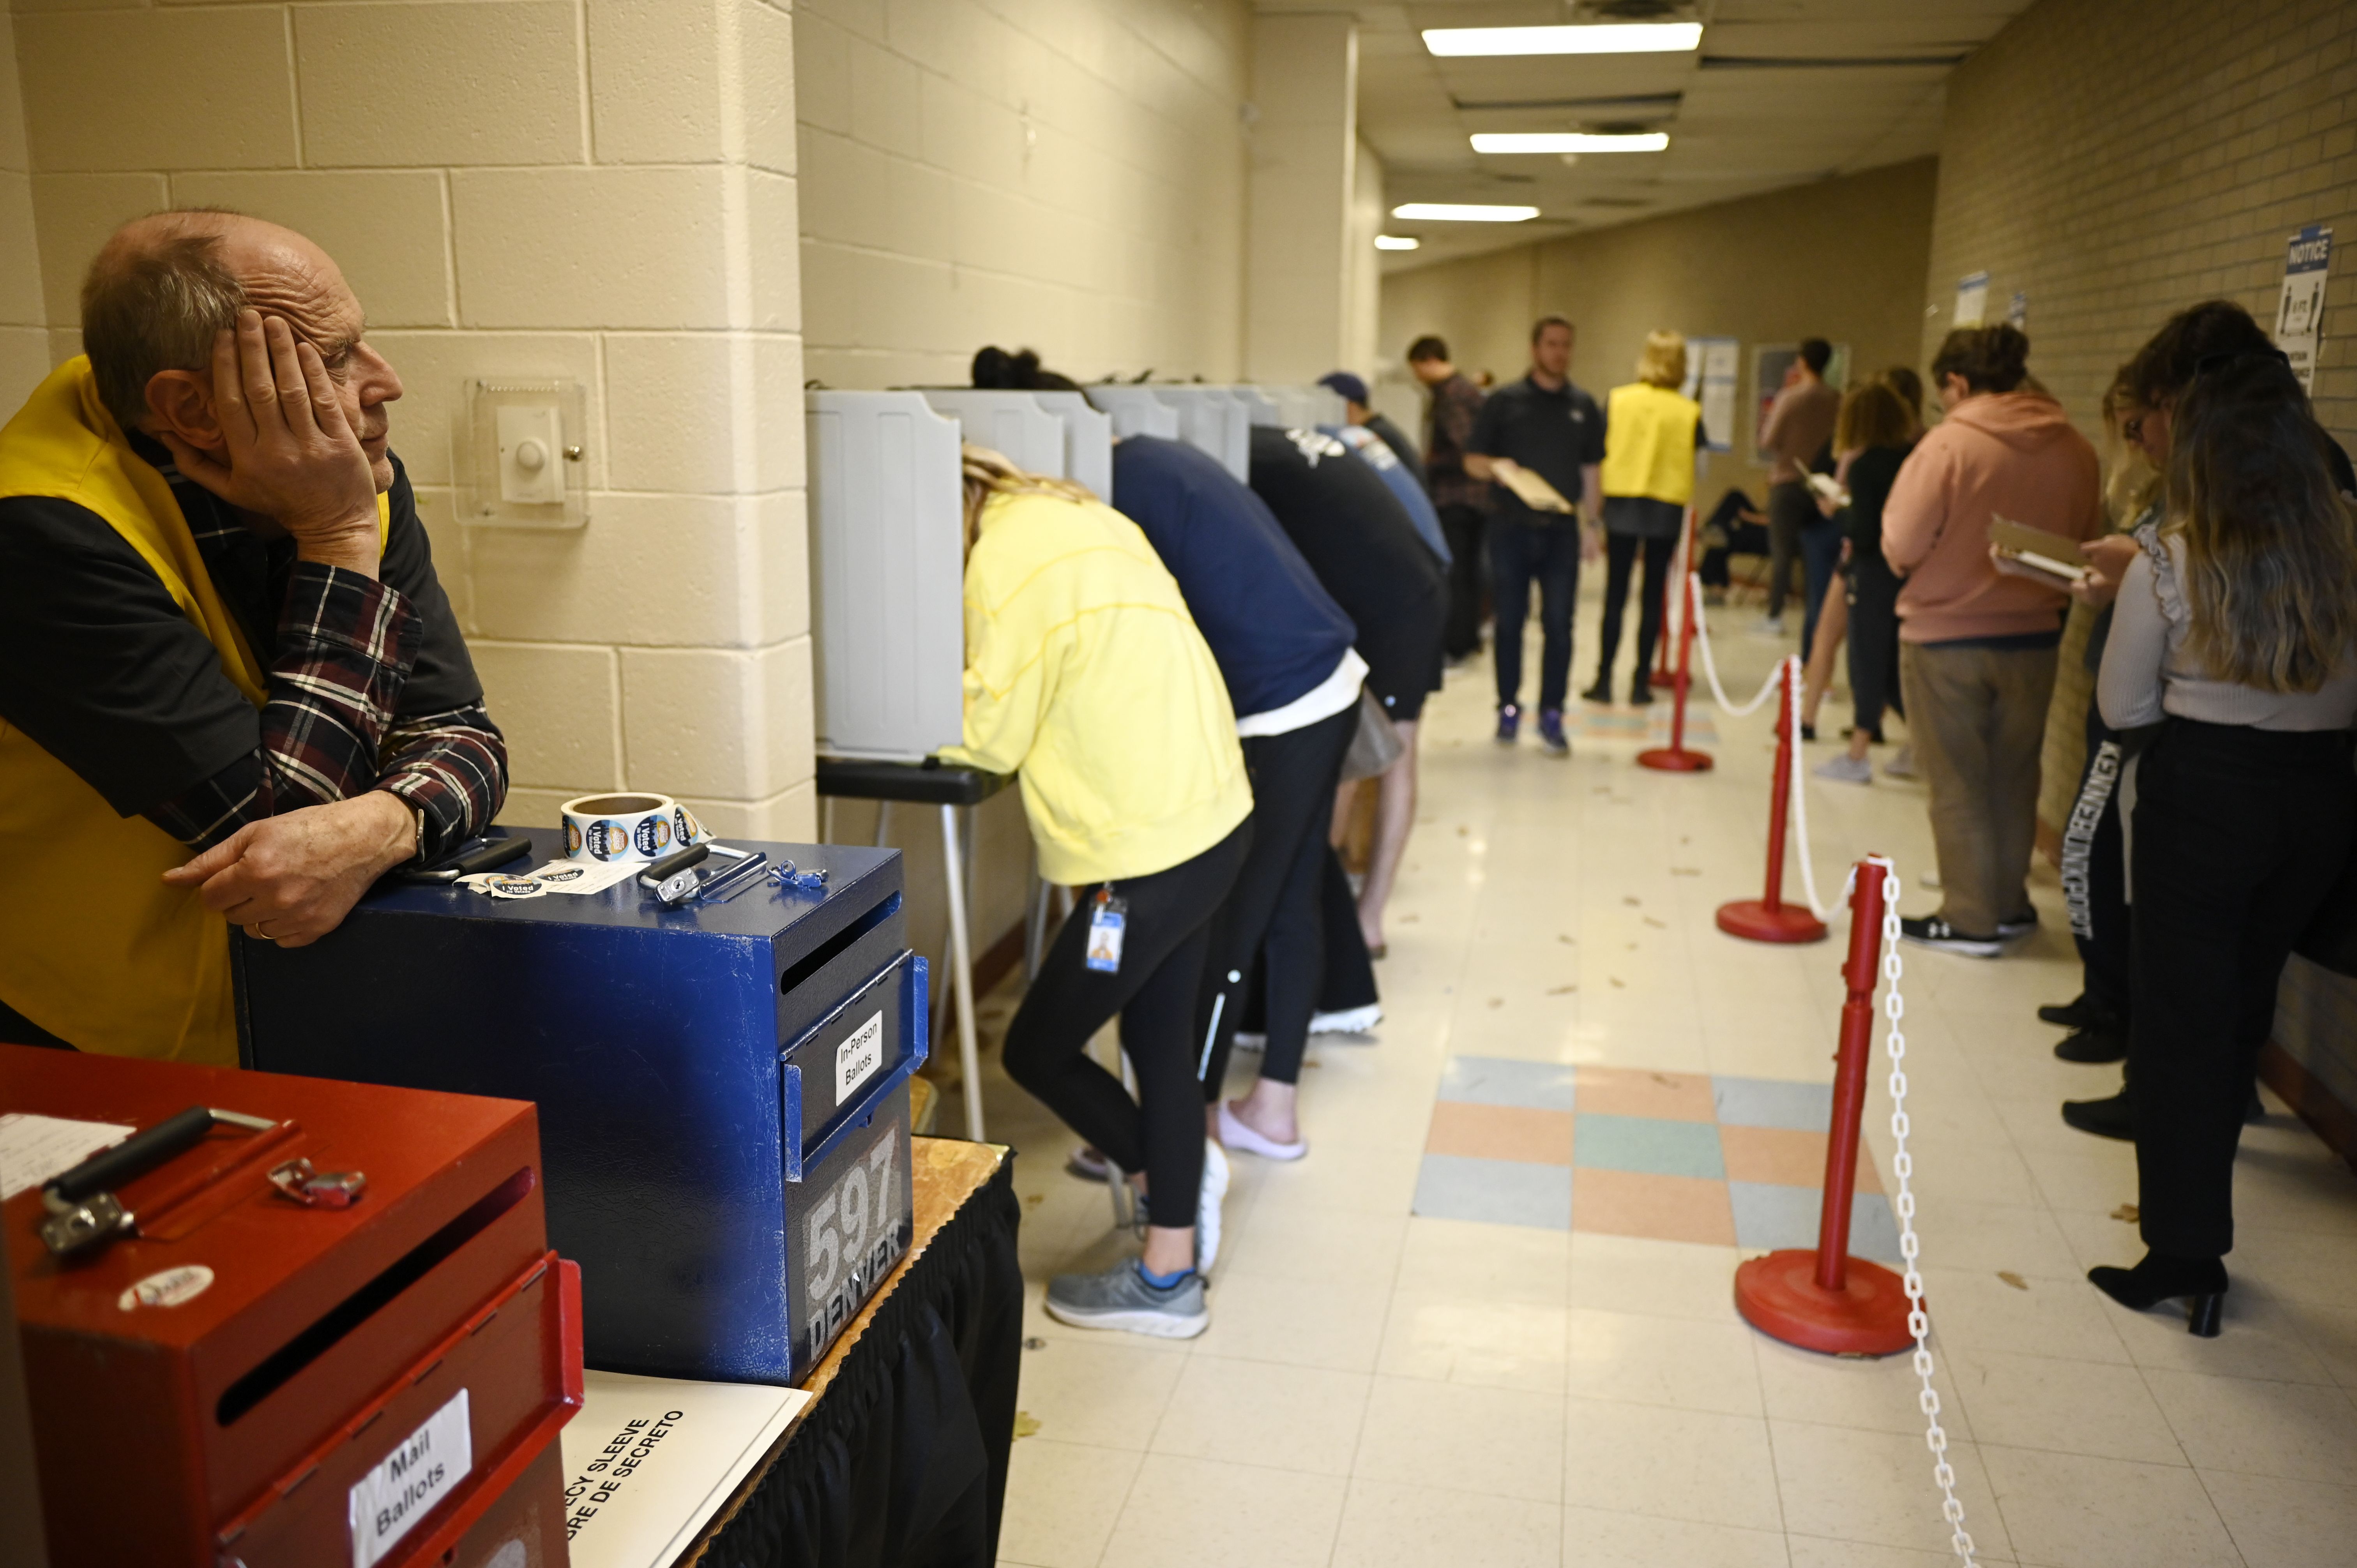 Election Judge John Franco, left, is watching voters waiting in the line at Voter Service and Polling Center in North High school in Denver, Colorado.